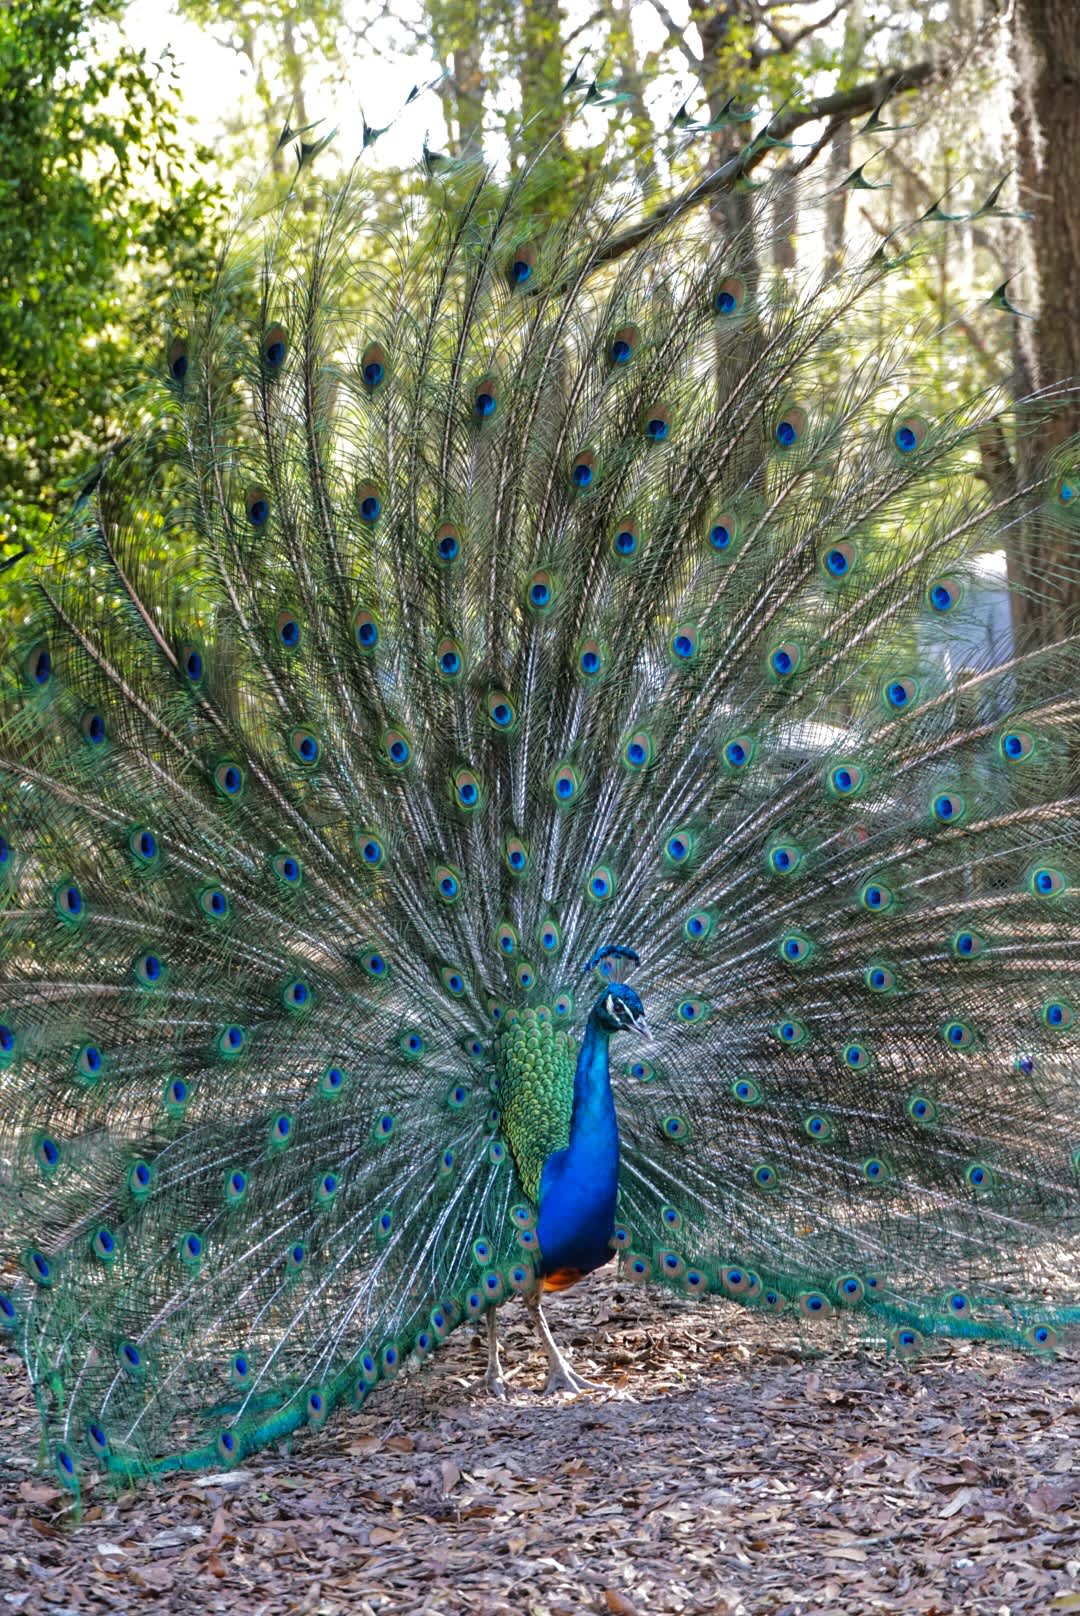 Colorful peacock 